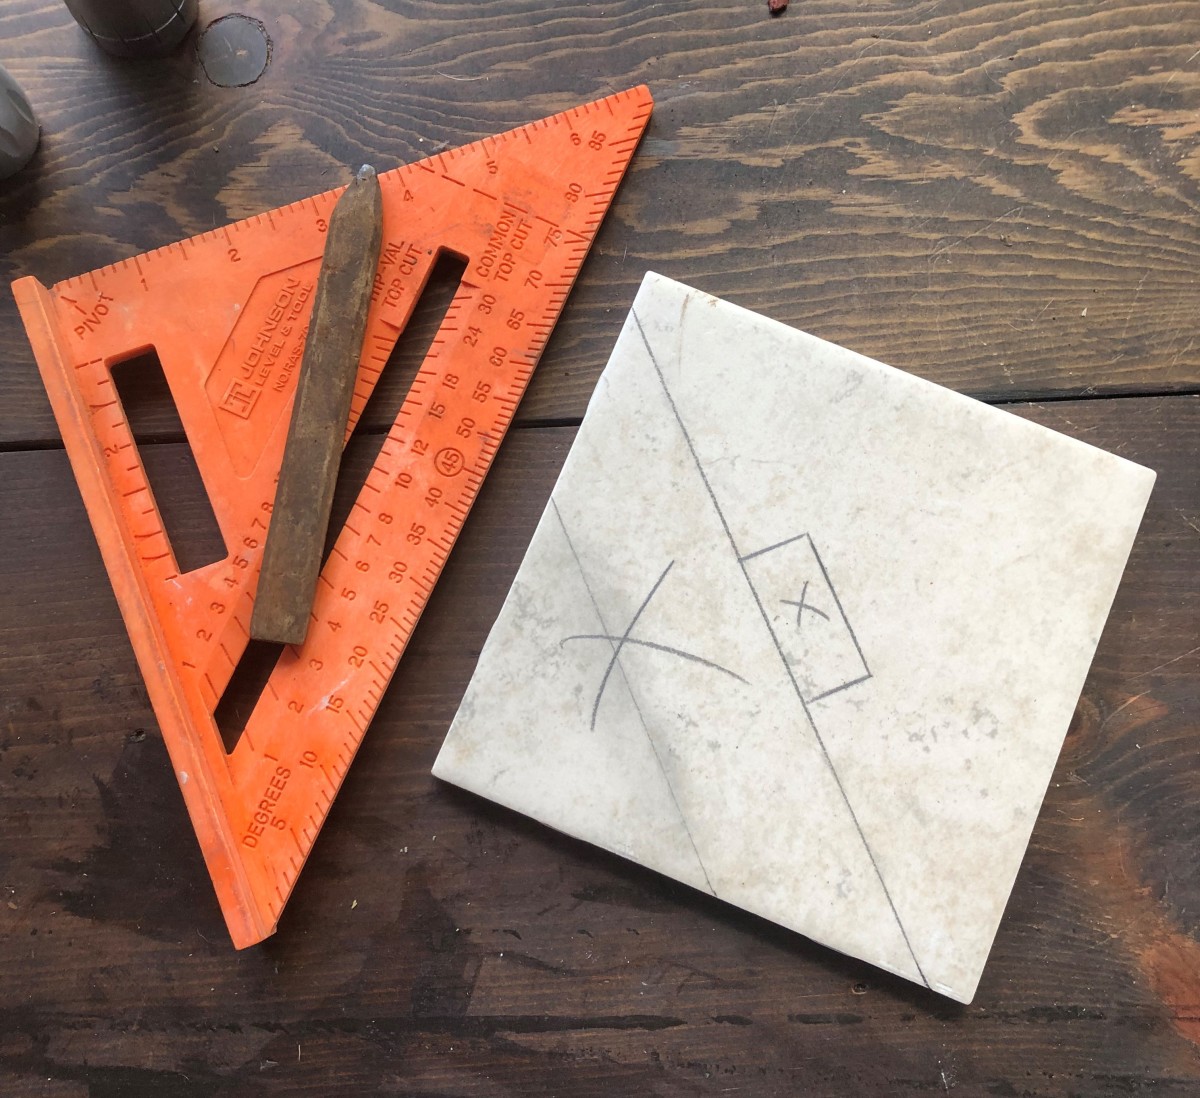 Use a speed square and pencil to layout the cut. Notice the X marks on the unwanted pieces. This comes in handy when making multiple cuts.